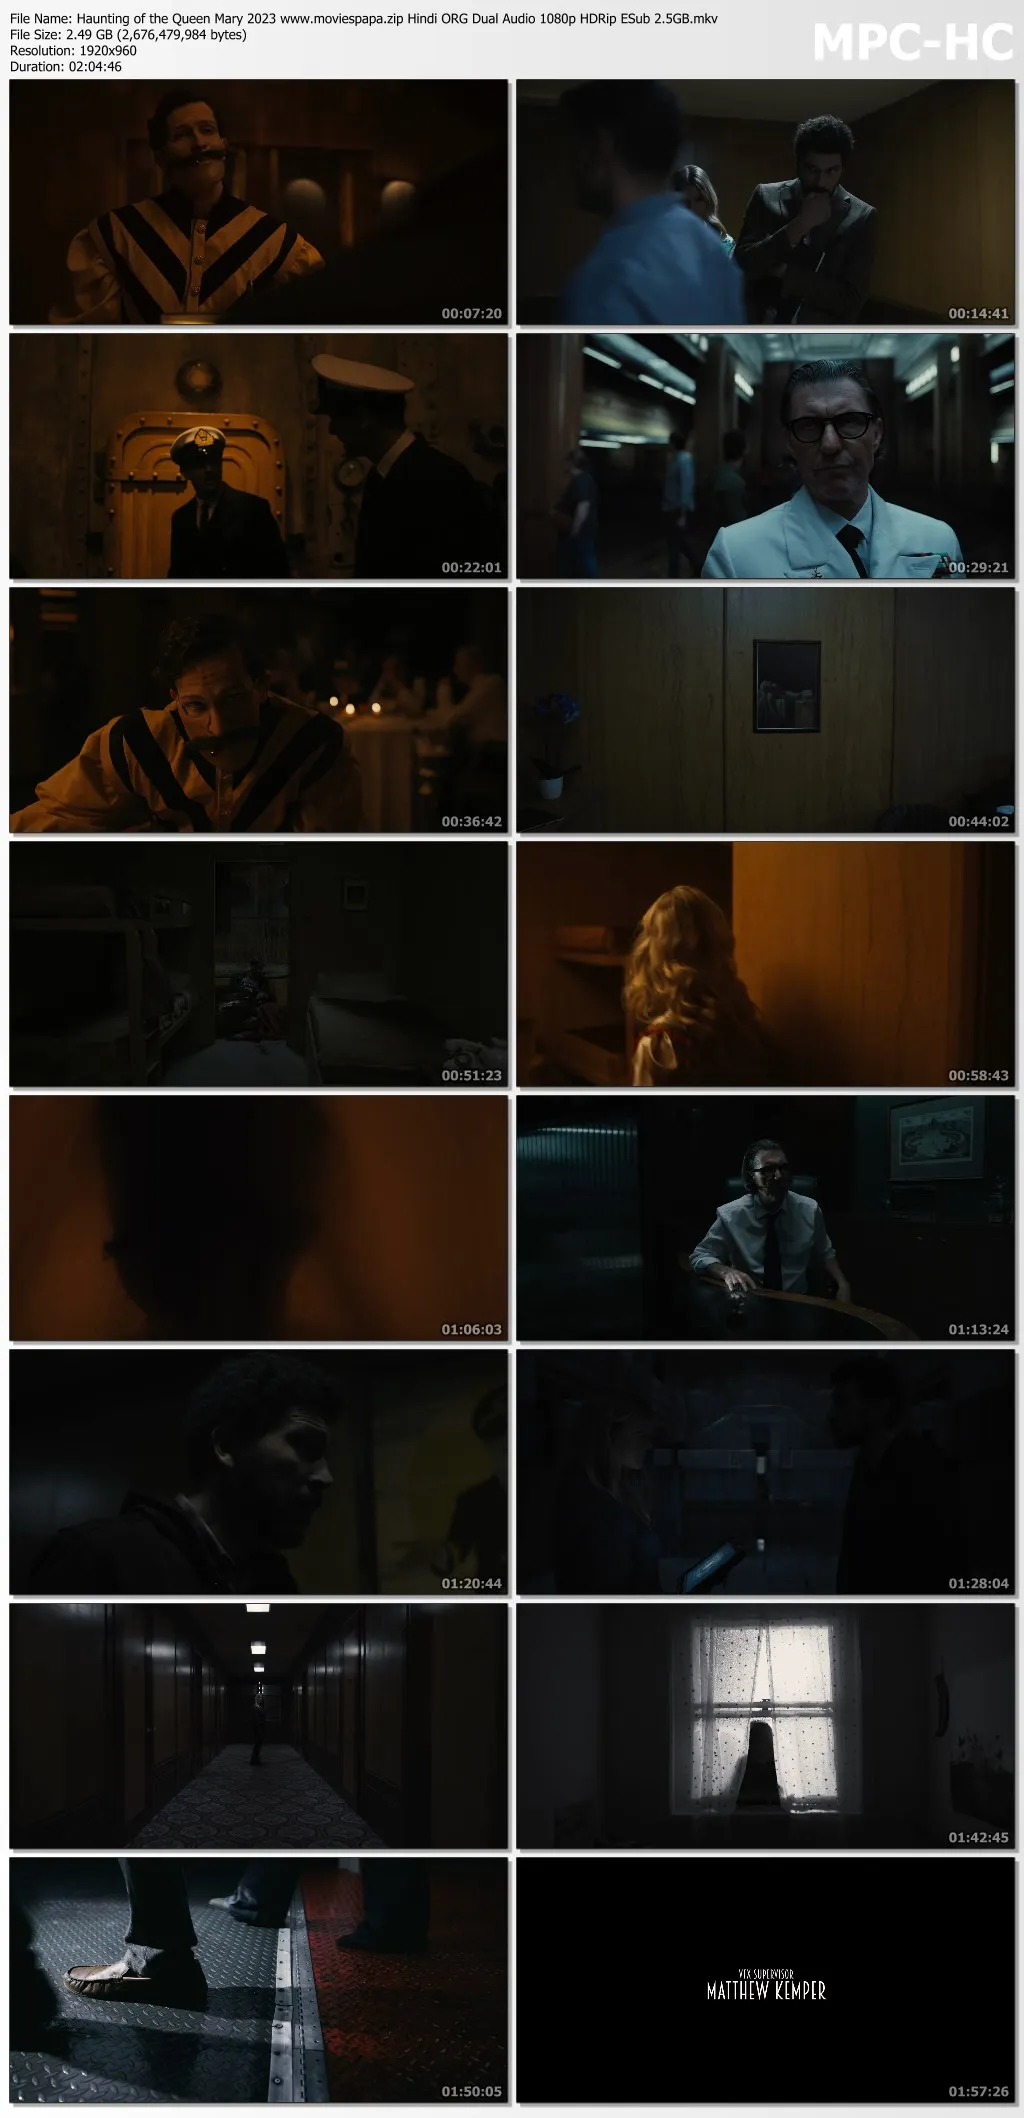 Haunting of the Queen Mary 2023 Hindi ORG Dual Audio 1080p | 720p | 480p HDRip ESub D